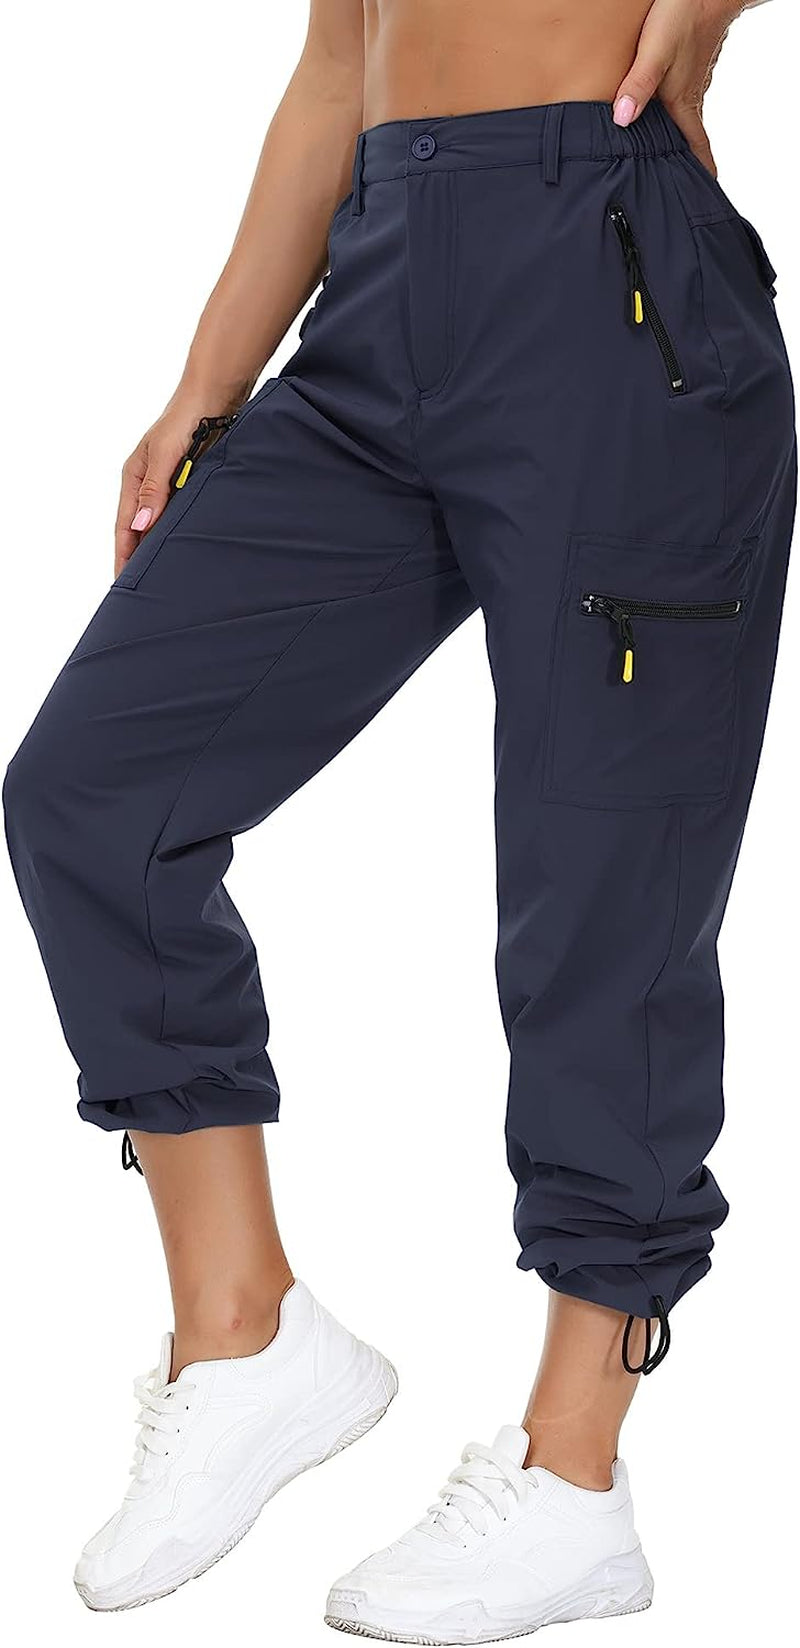 Women'S Hiking Cargo Pants Lightweight Quick Dry Outdoor Athletic Pants 